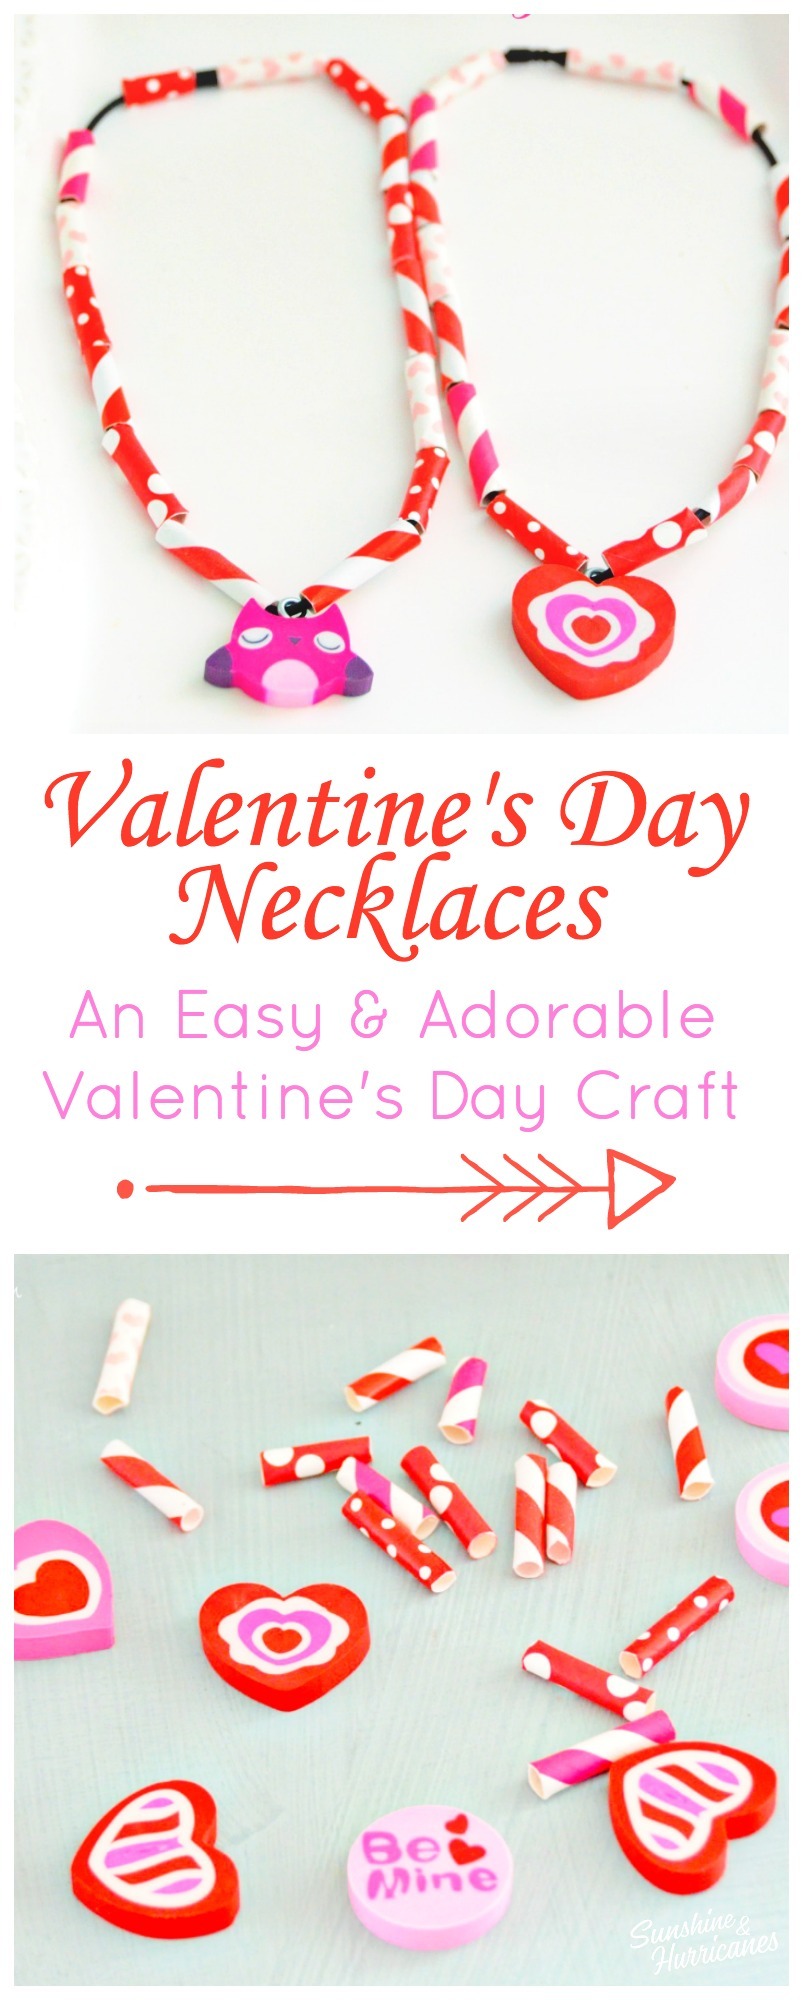 These Adorable Valentine's Day Necklaces are so super easy to make! A perfect Valentine's Day craft for a school party or just festive fun at home. 